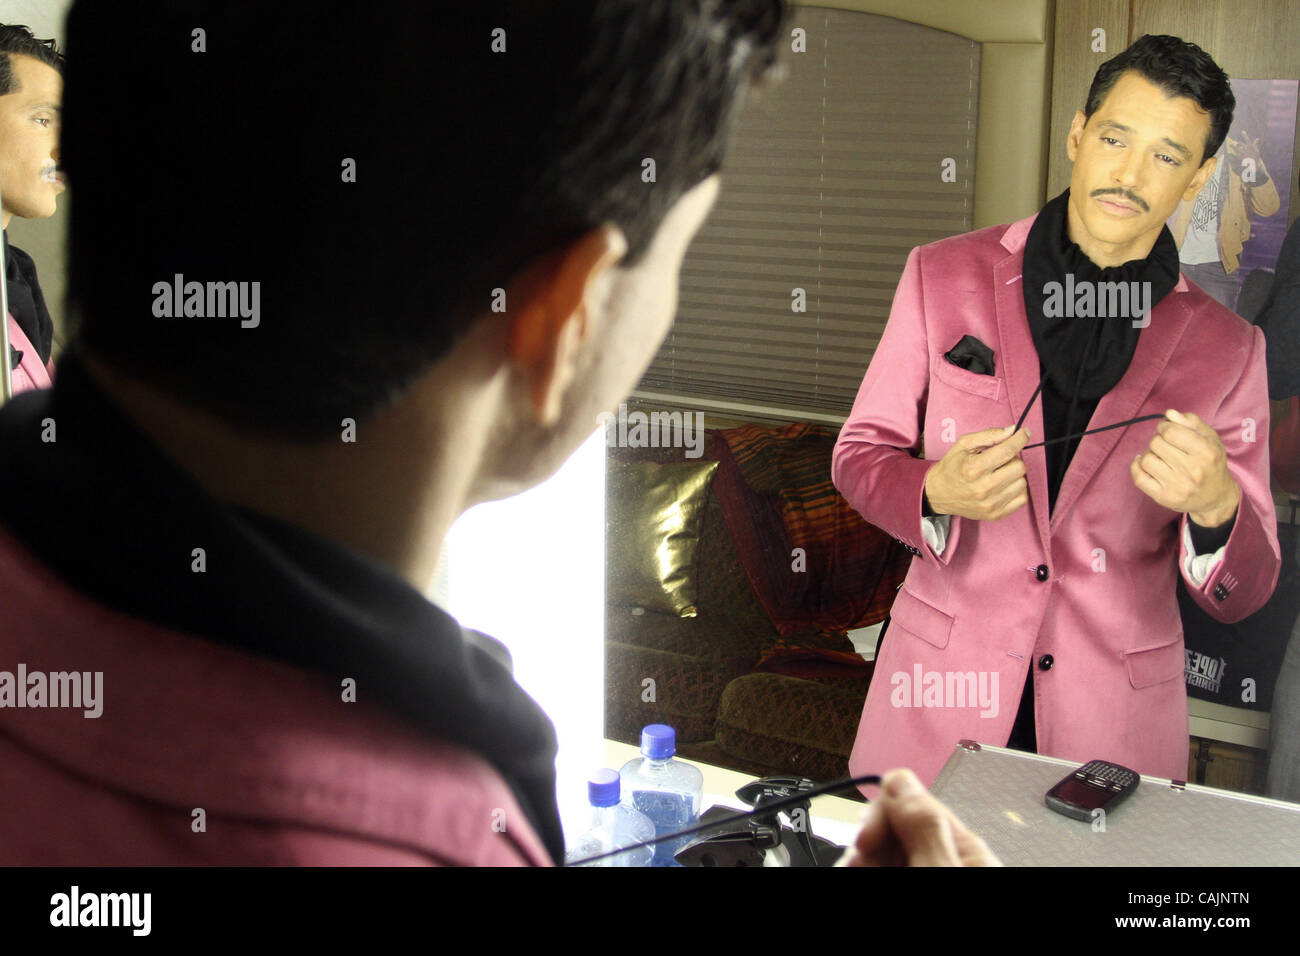 Jan. 12, 2011 - Los Angeles, California, U.S - 80's R&B star EL DEBARGE photographed backstage before a television appearance. El DeBarge, once married to Janet Jackson, is making a comeback after a series of setbacks, and has released his first music in over 15 years and has been nominated for two  Stock Photo